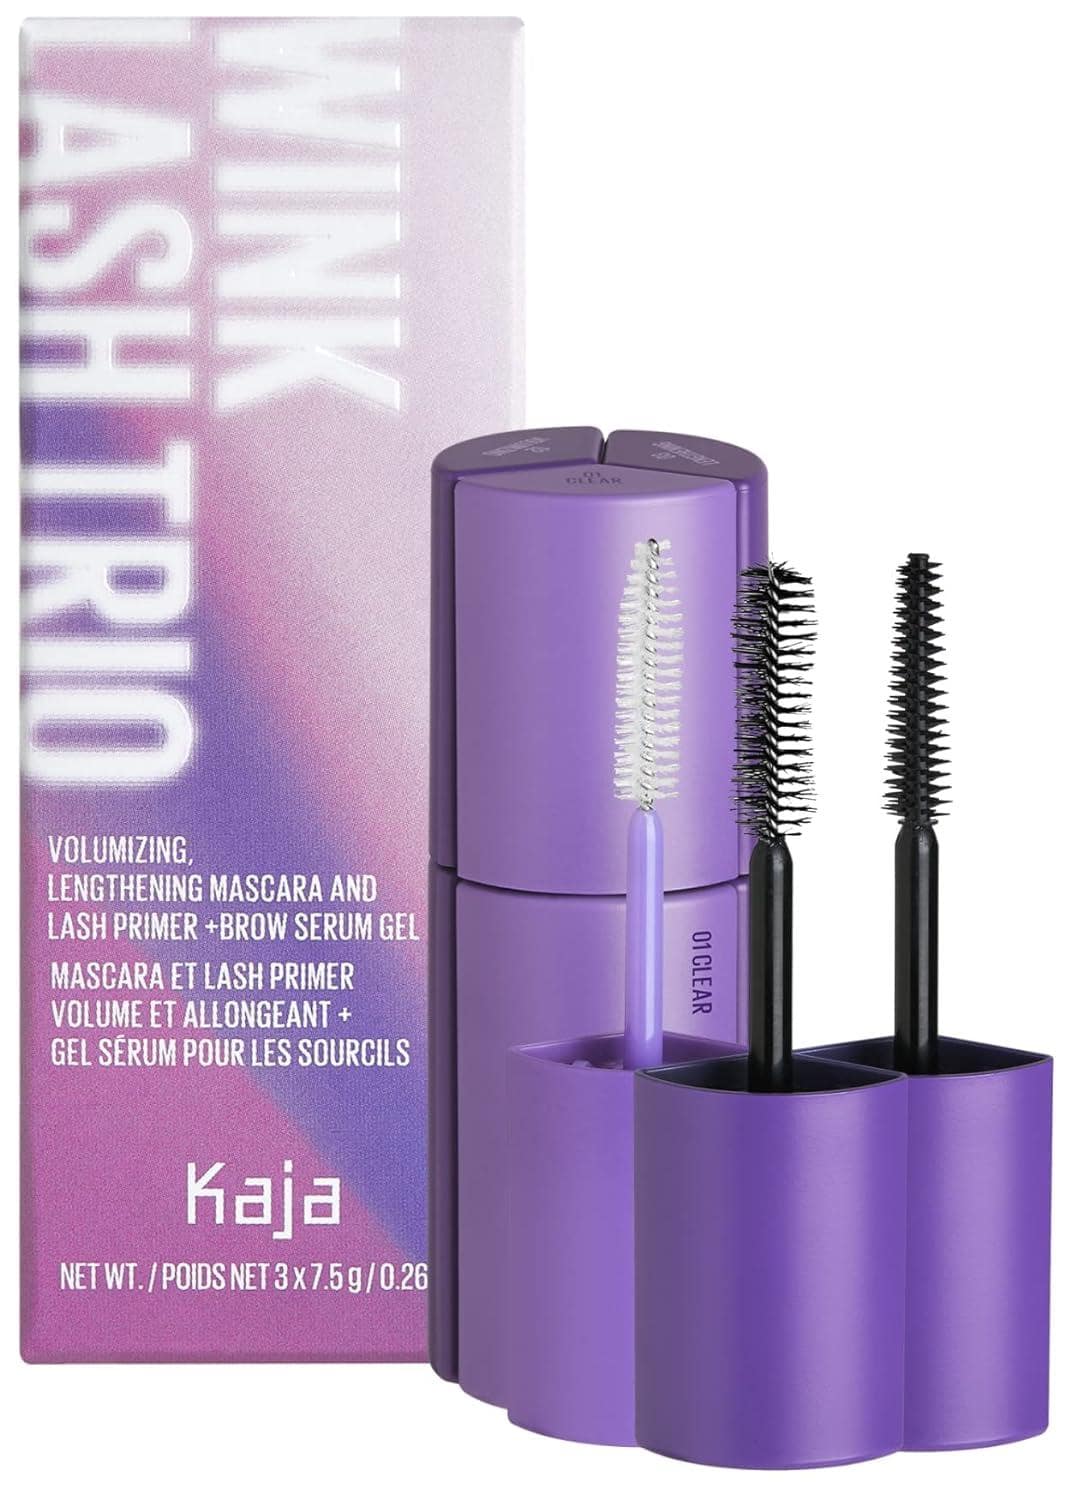 Opting for Kaja's mascara trio has proven to be my go-to solution, featuring a clear primer, a lengthening mascara, and a volumizing mascara—an all-in-one choice for the best mascara for length and volume in my collection.